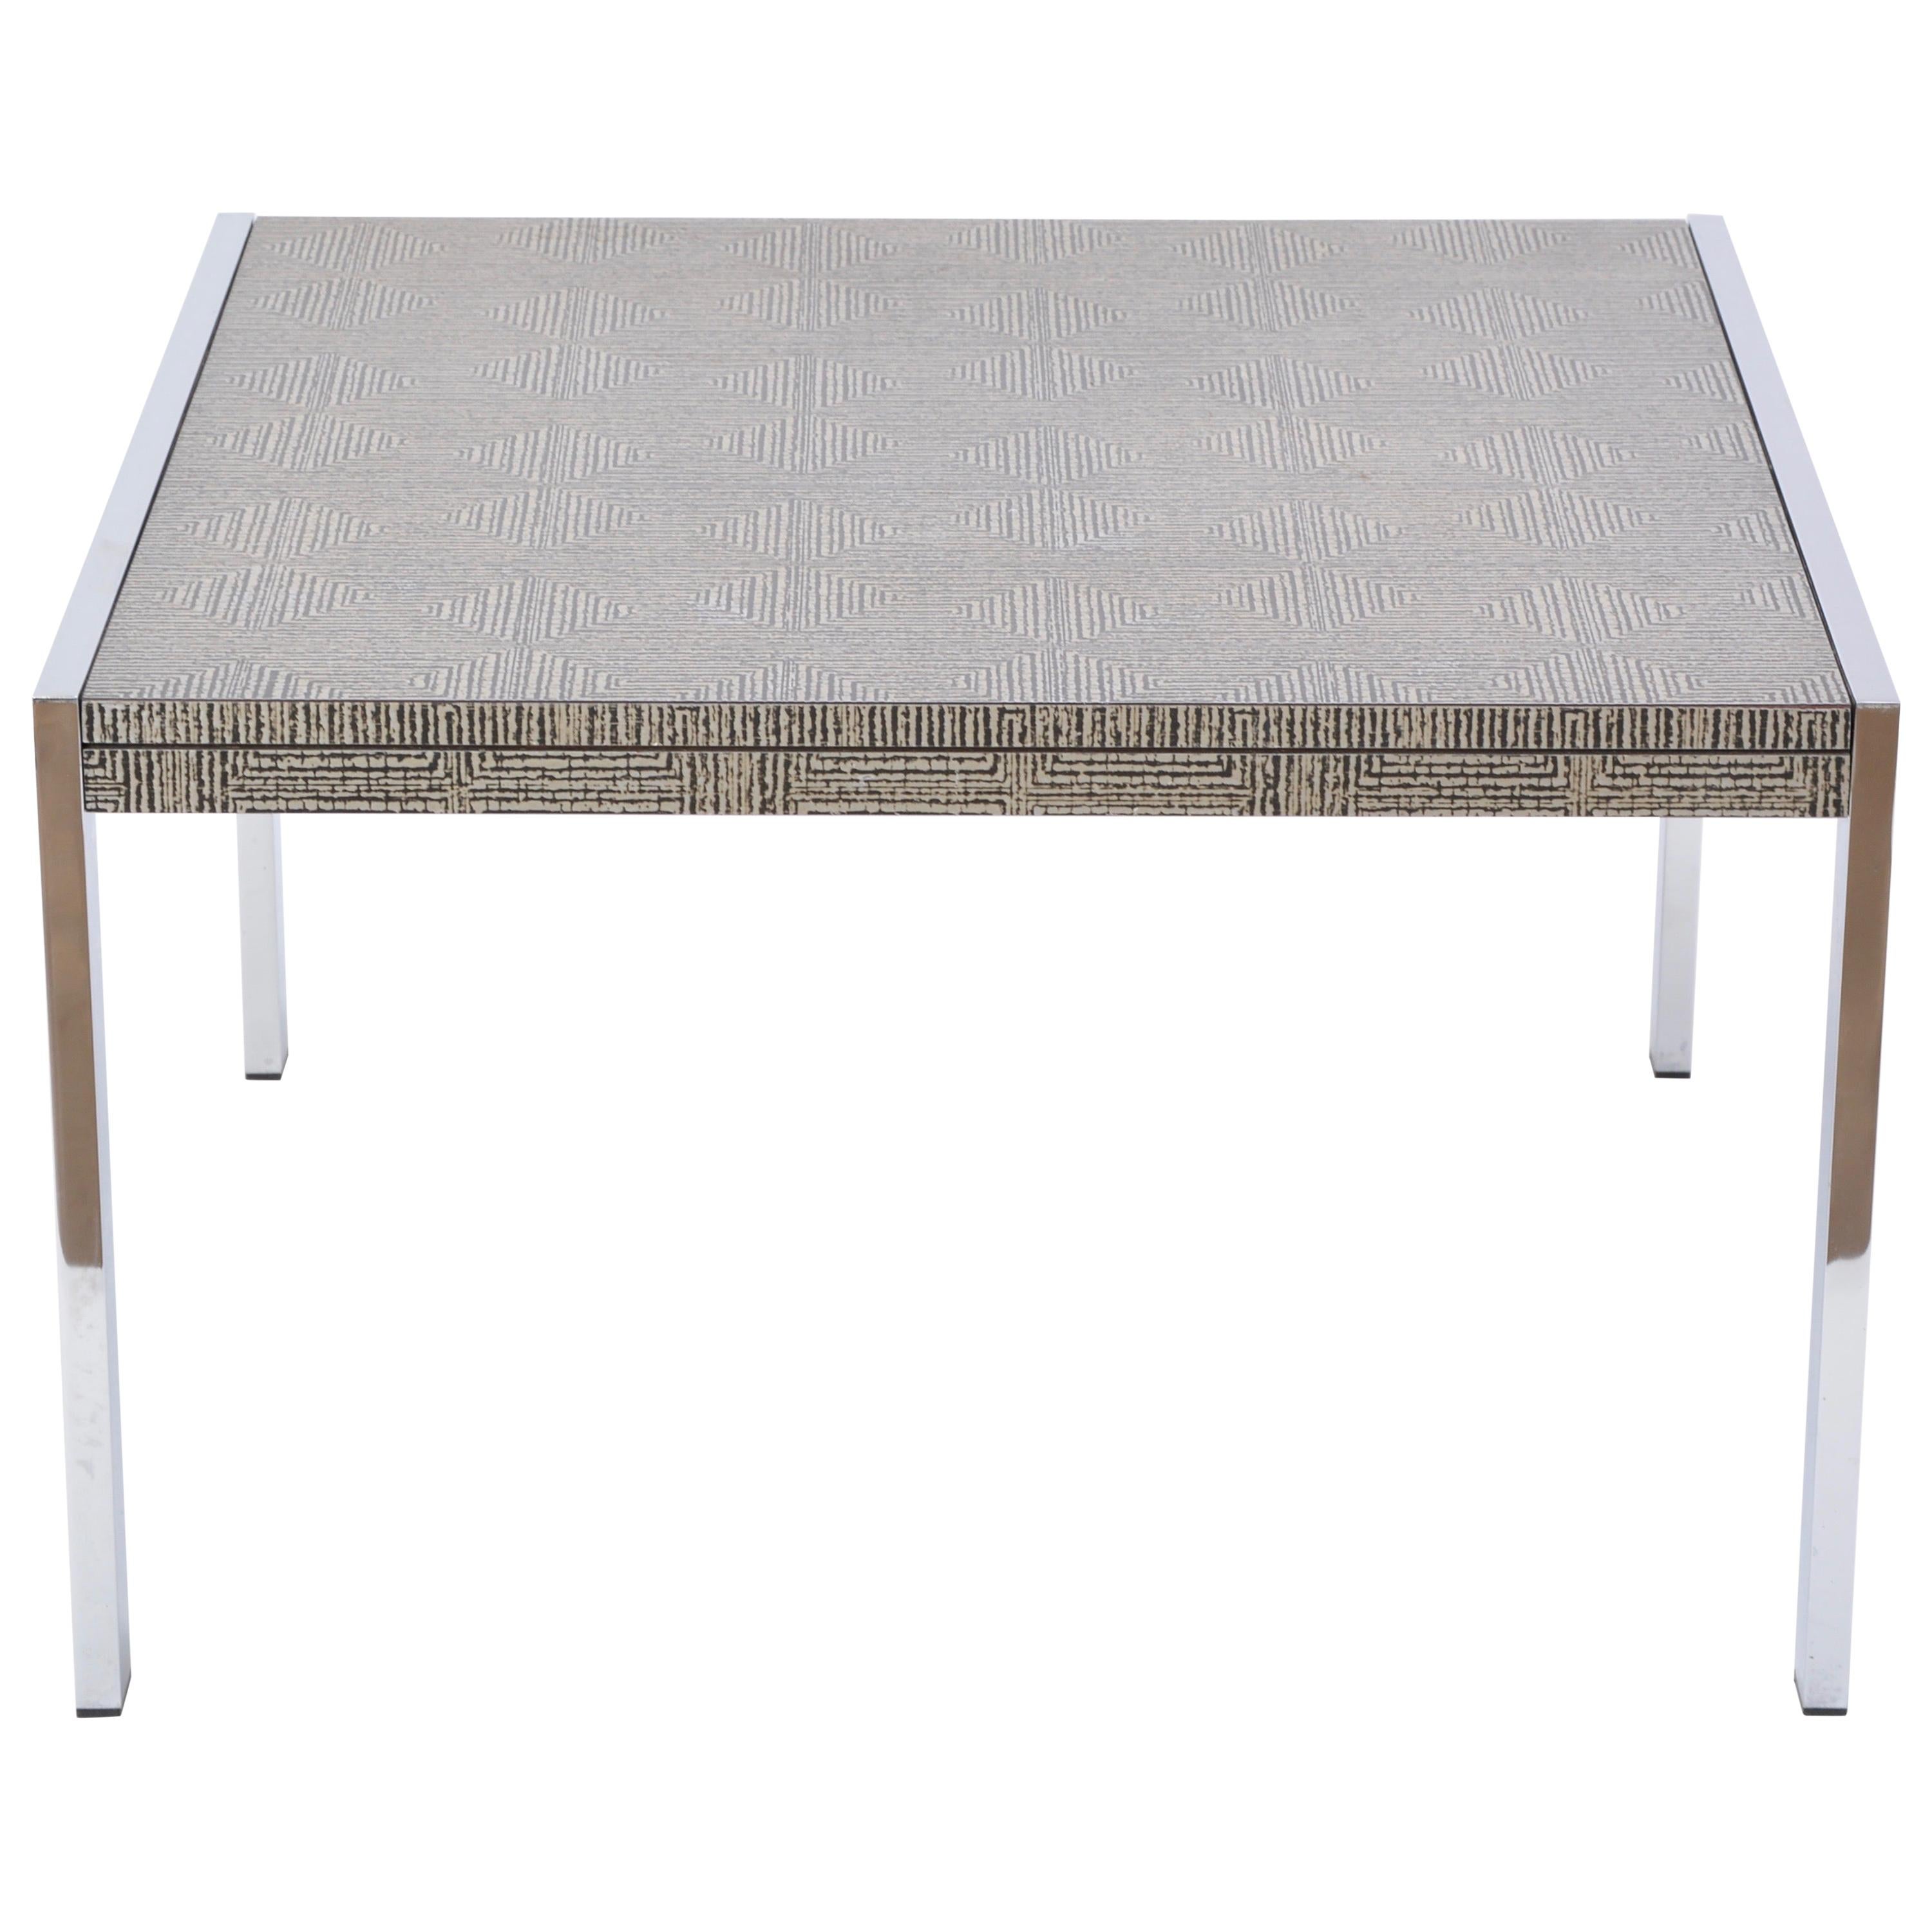 Mid-Century Modern Steel and Aluminium Coffee Table with Graphic Meander Pattern